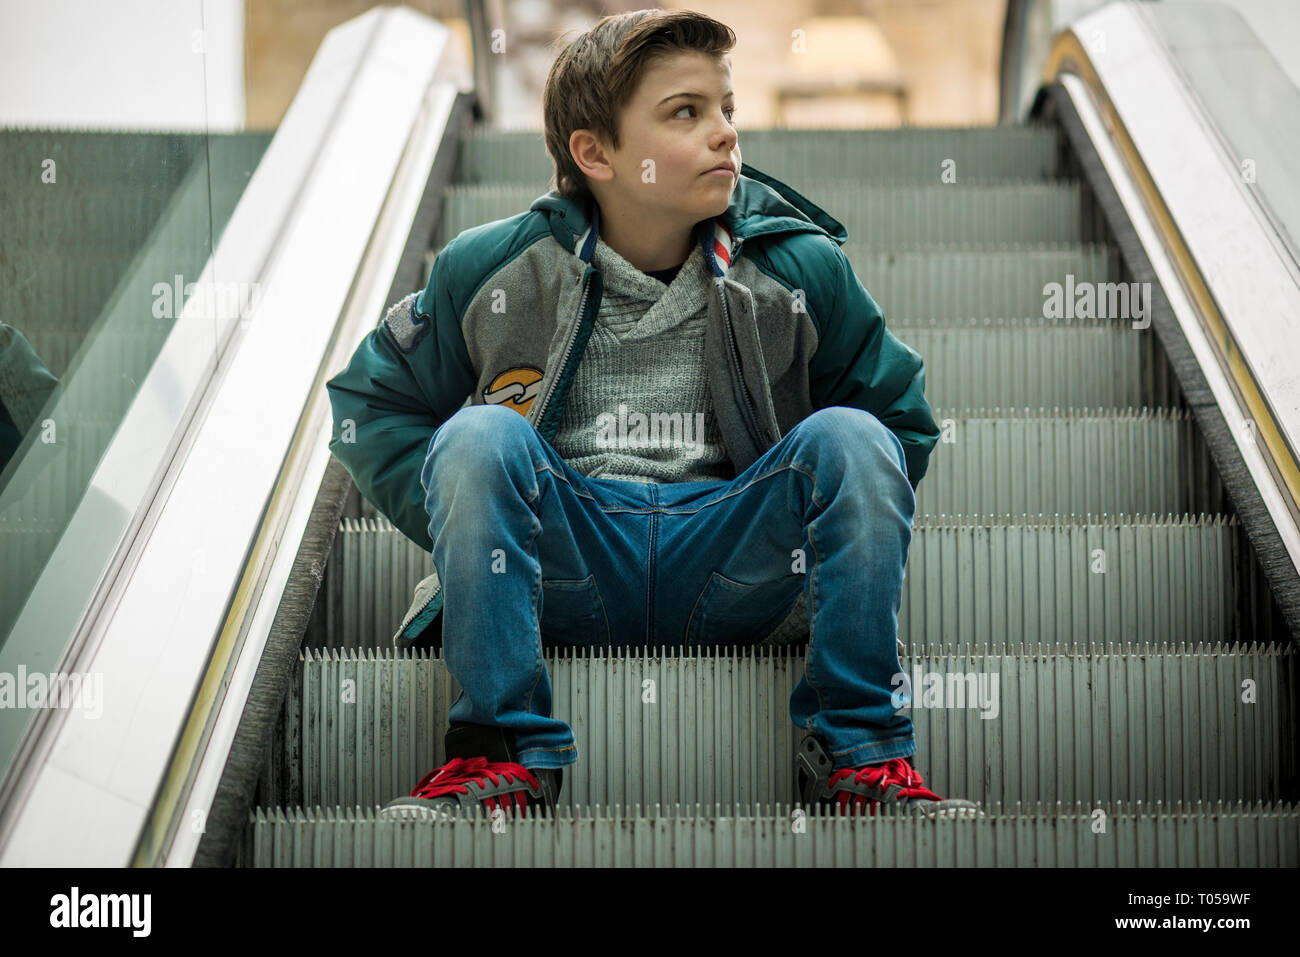 Cool boy sitting on escalator Banque D'Images